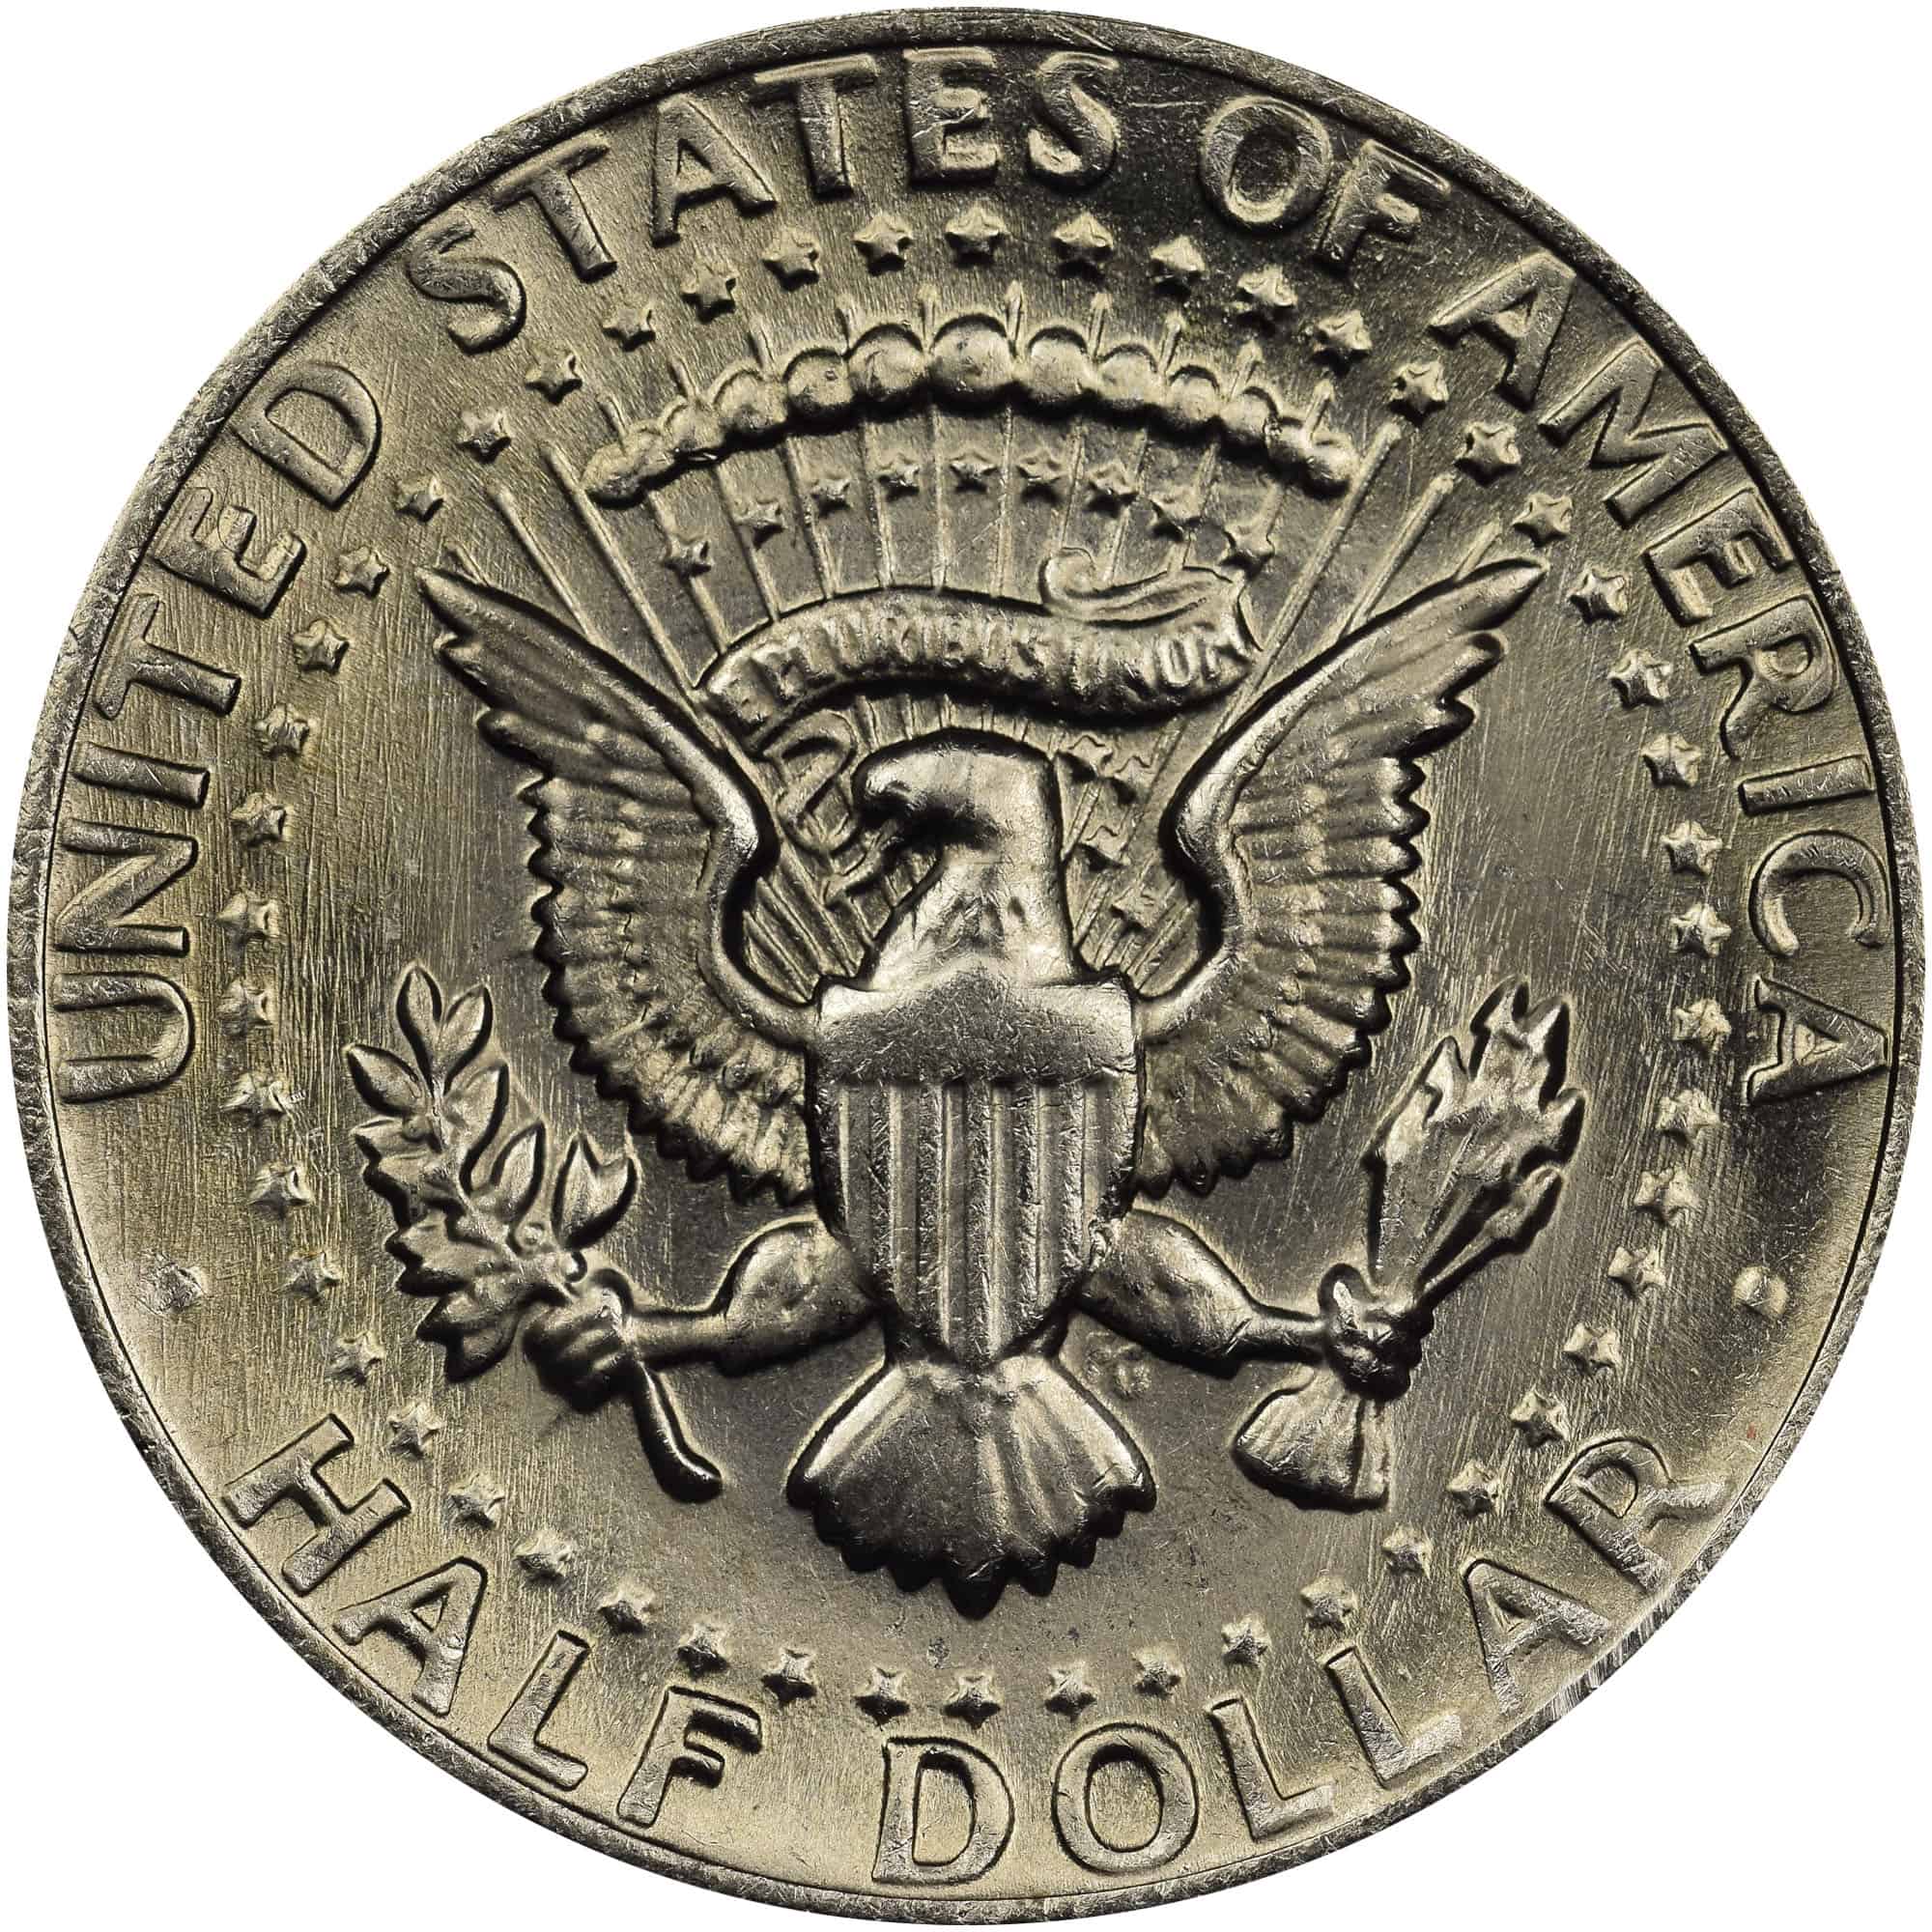 The Reverse of the 1983 Half Dollar